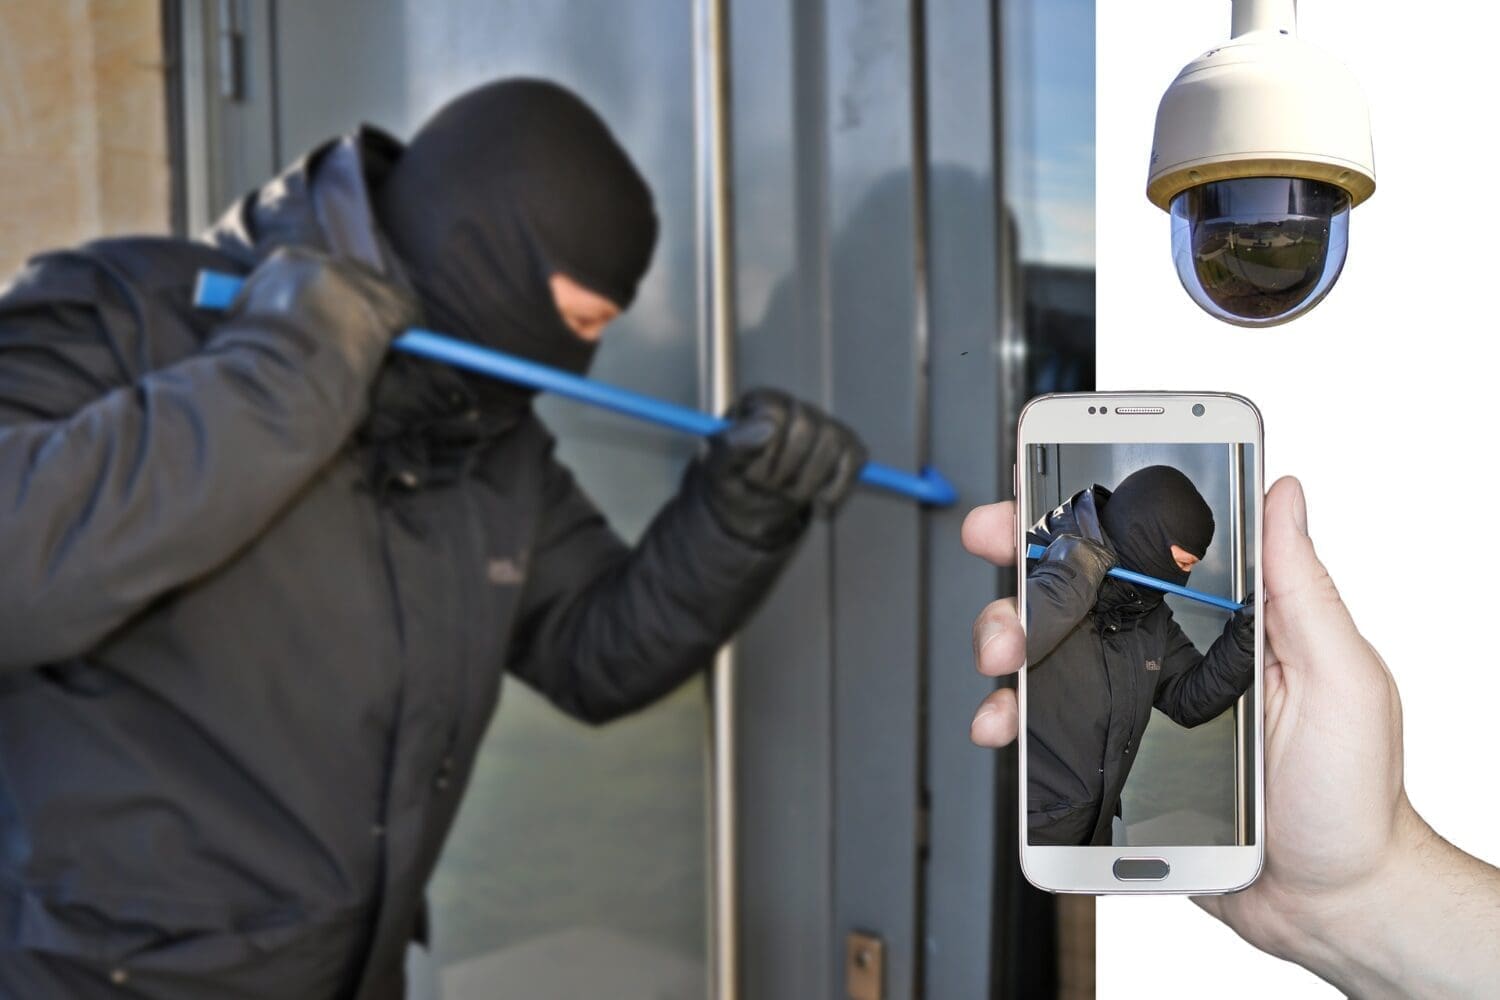 Protect your home from burglars